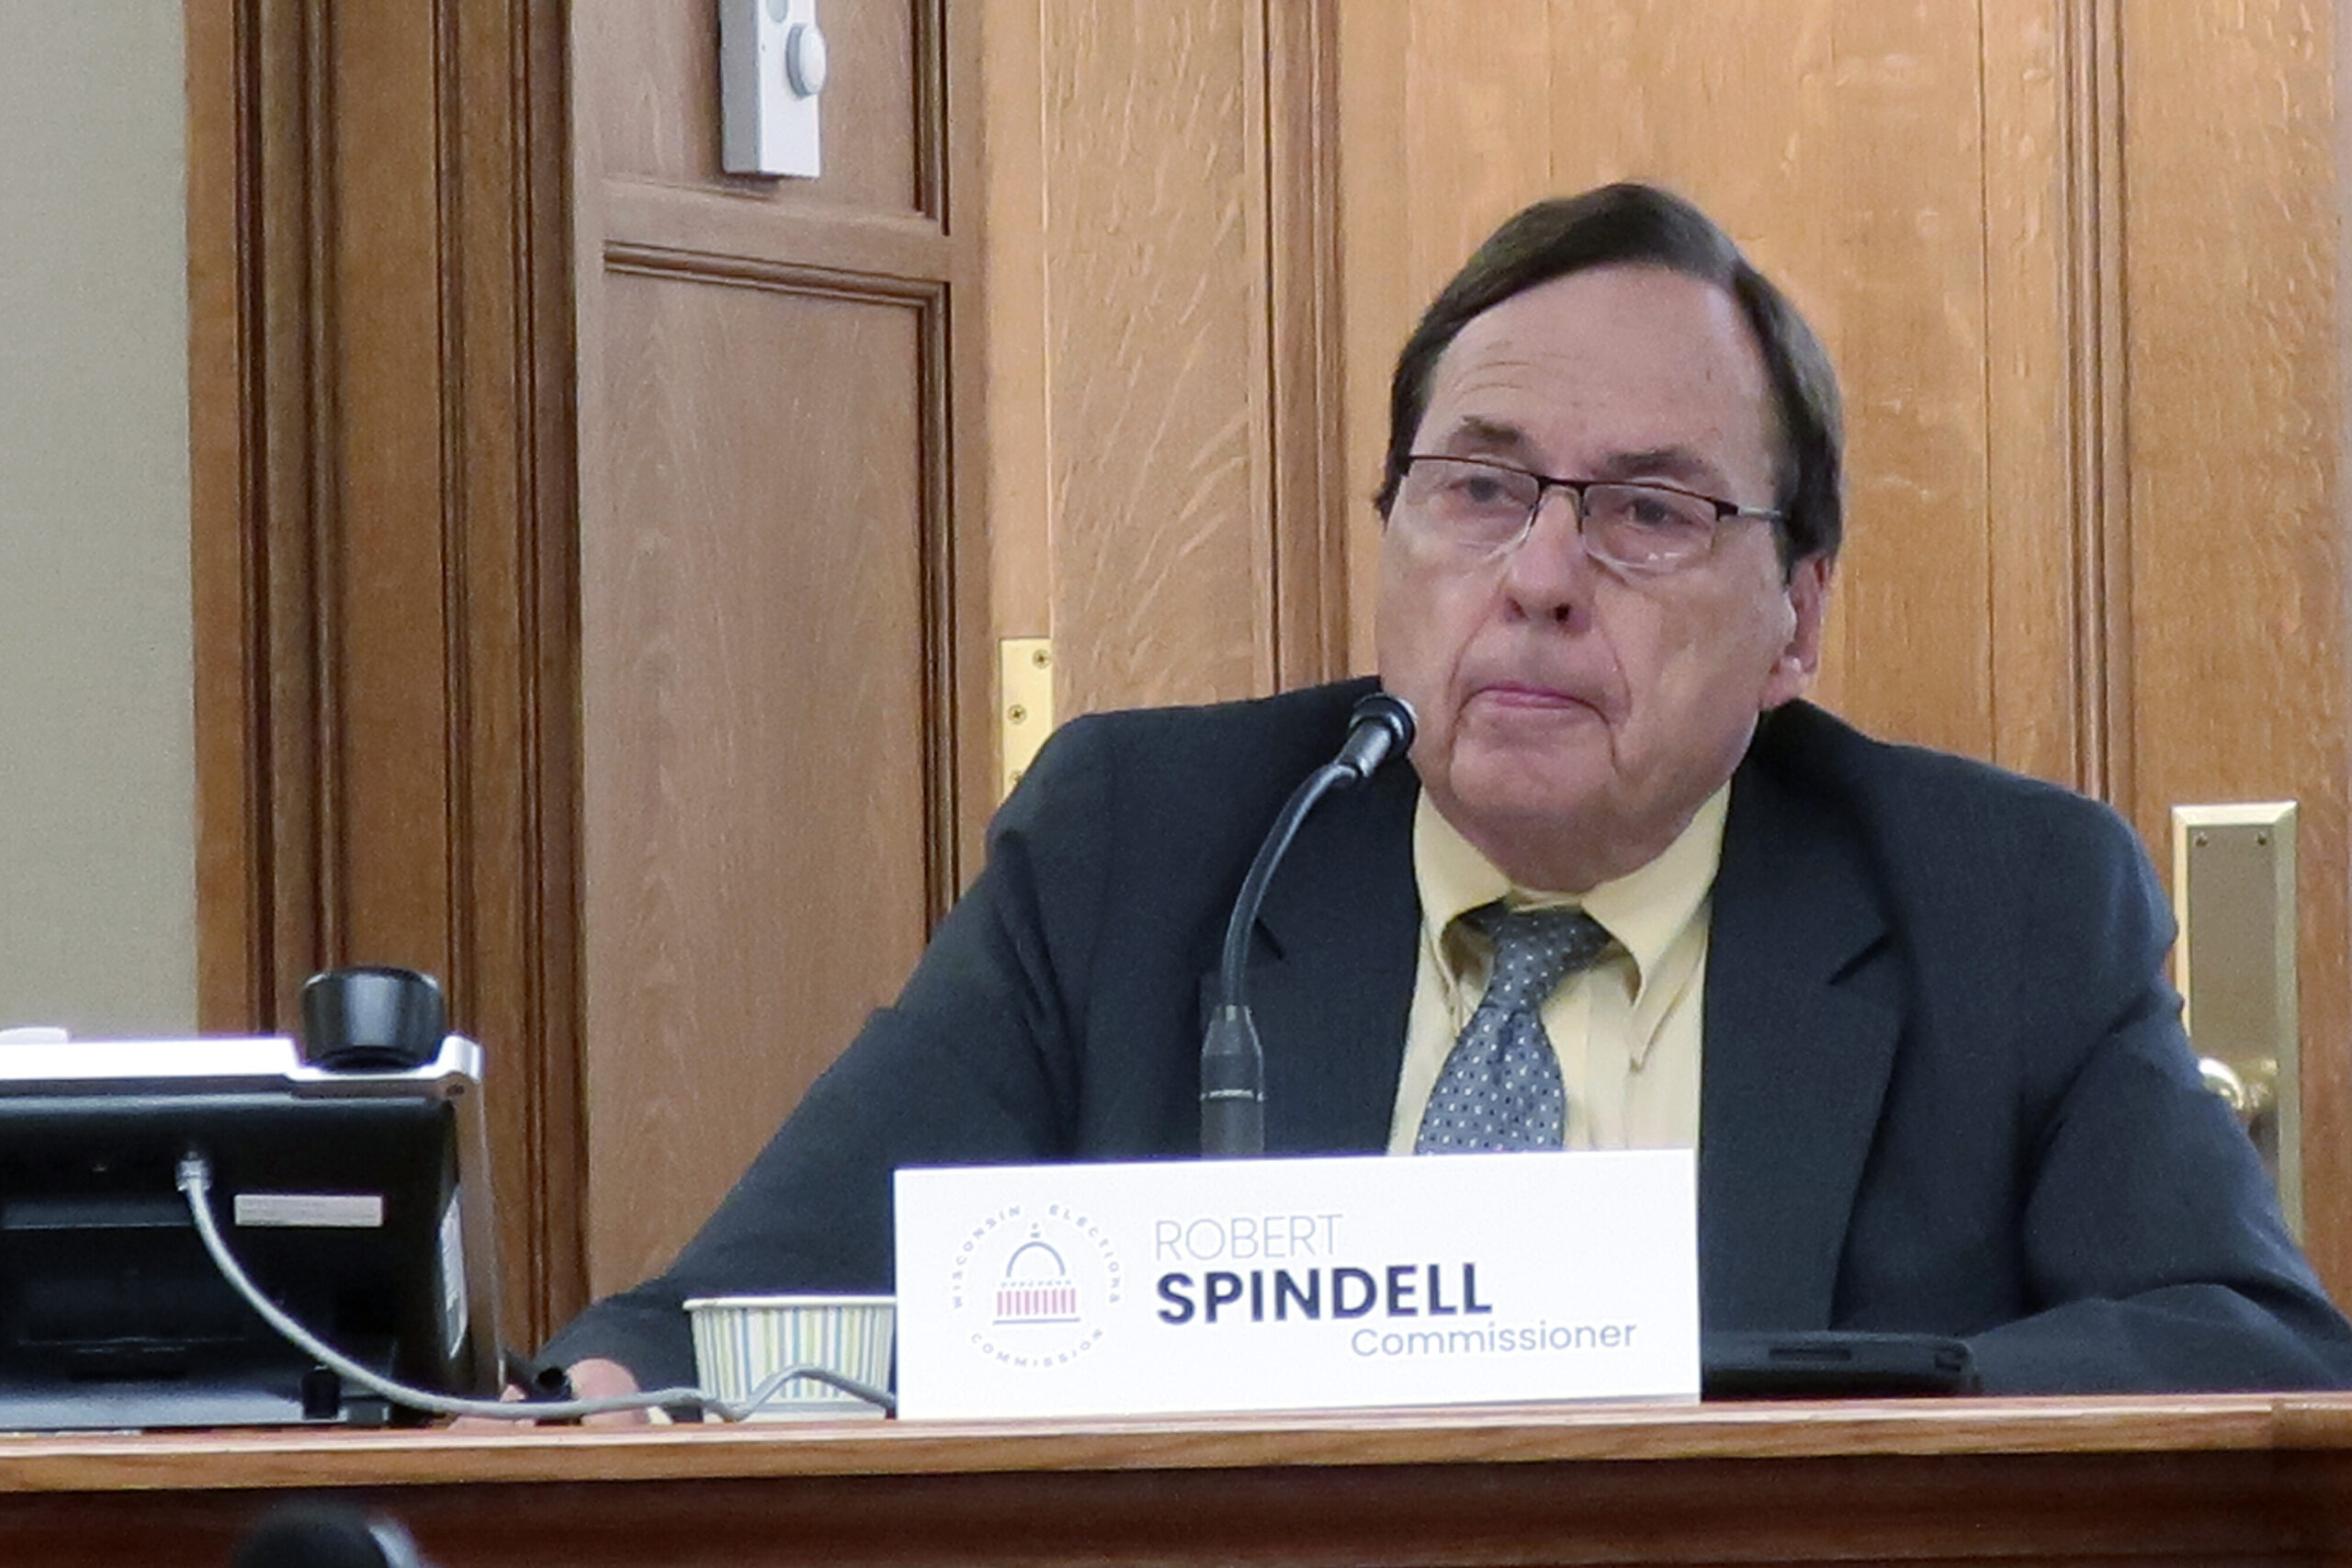 Activists renew call for resignation of Wisconsin elections commissioner Bob Spindell